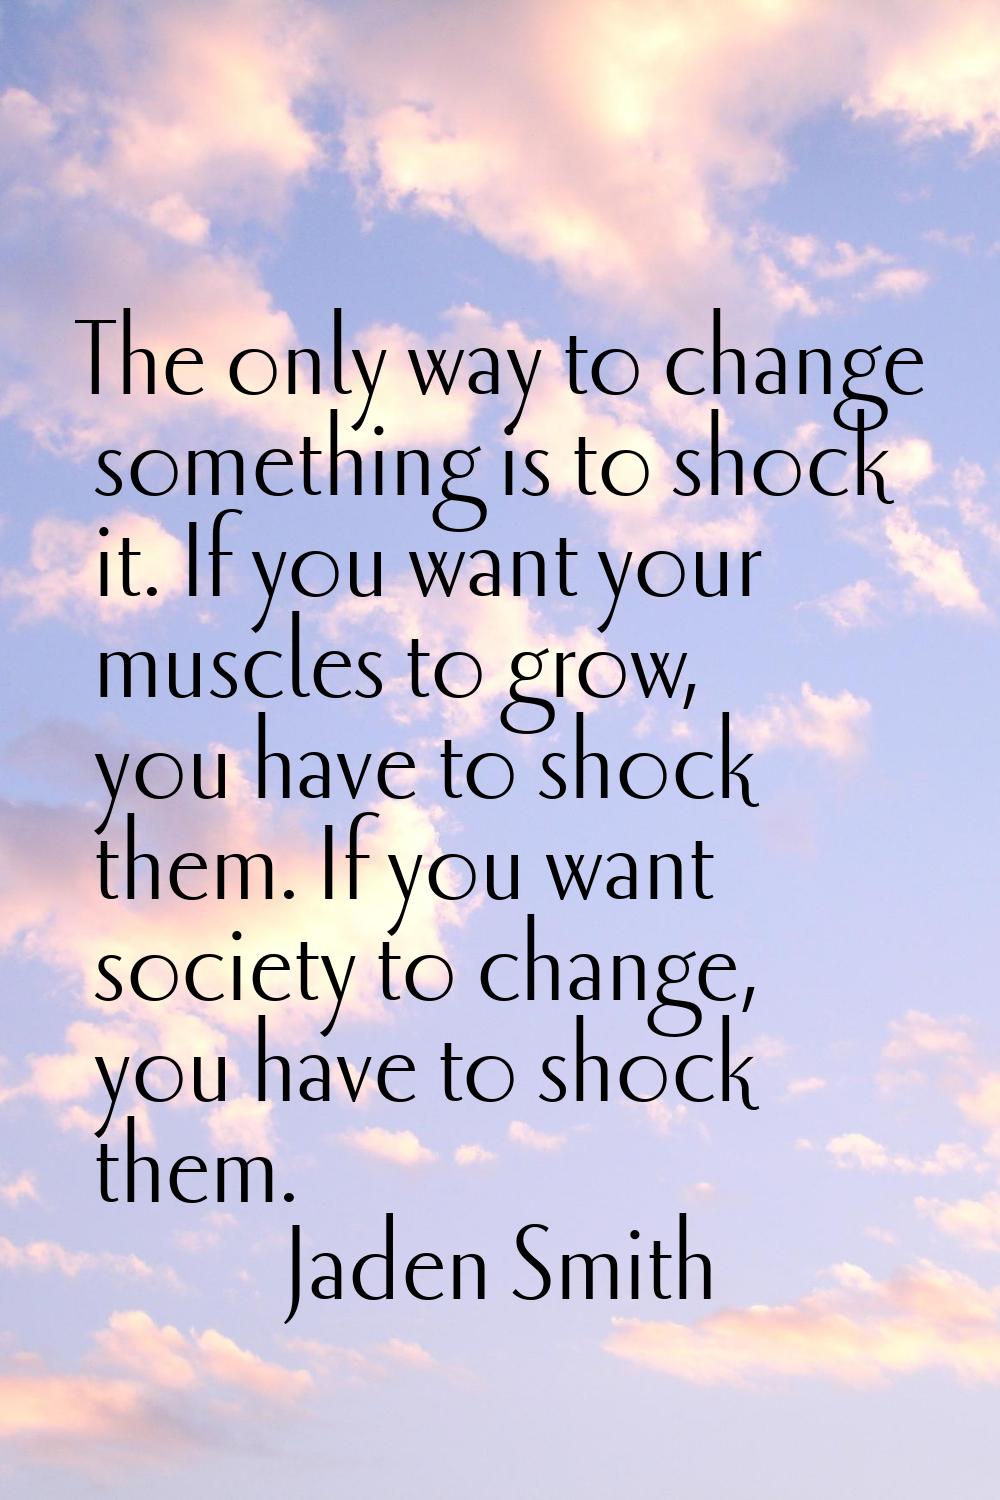 The only way to change something is to shock it. If you want your muscles to grow, you have to shoc